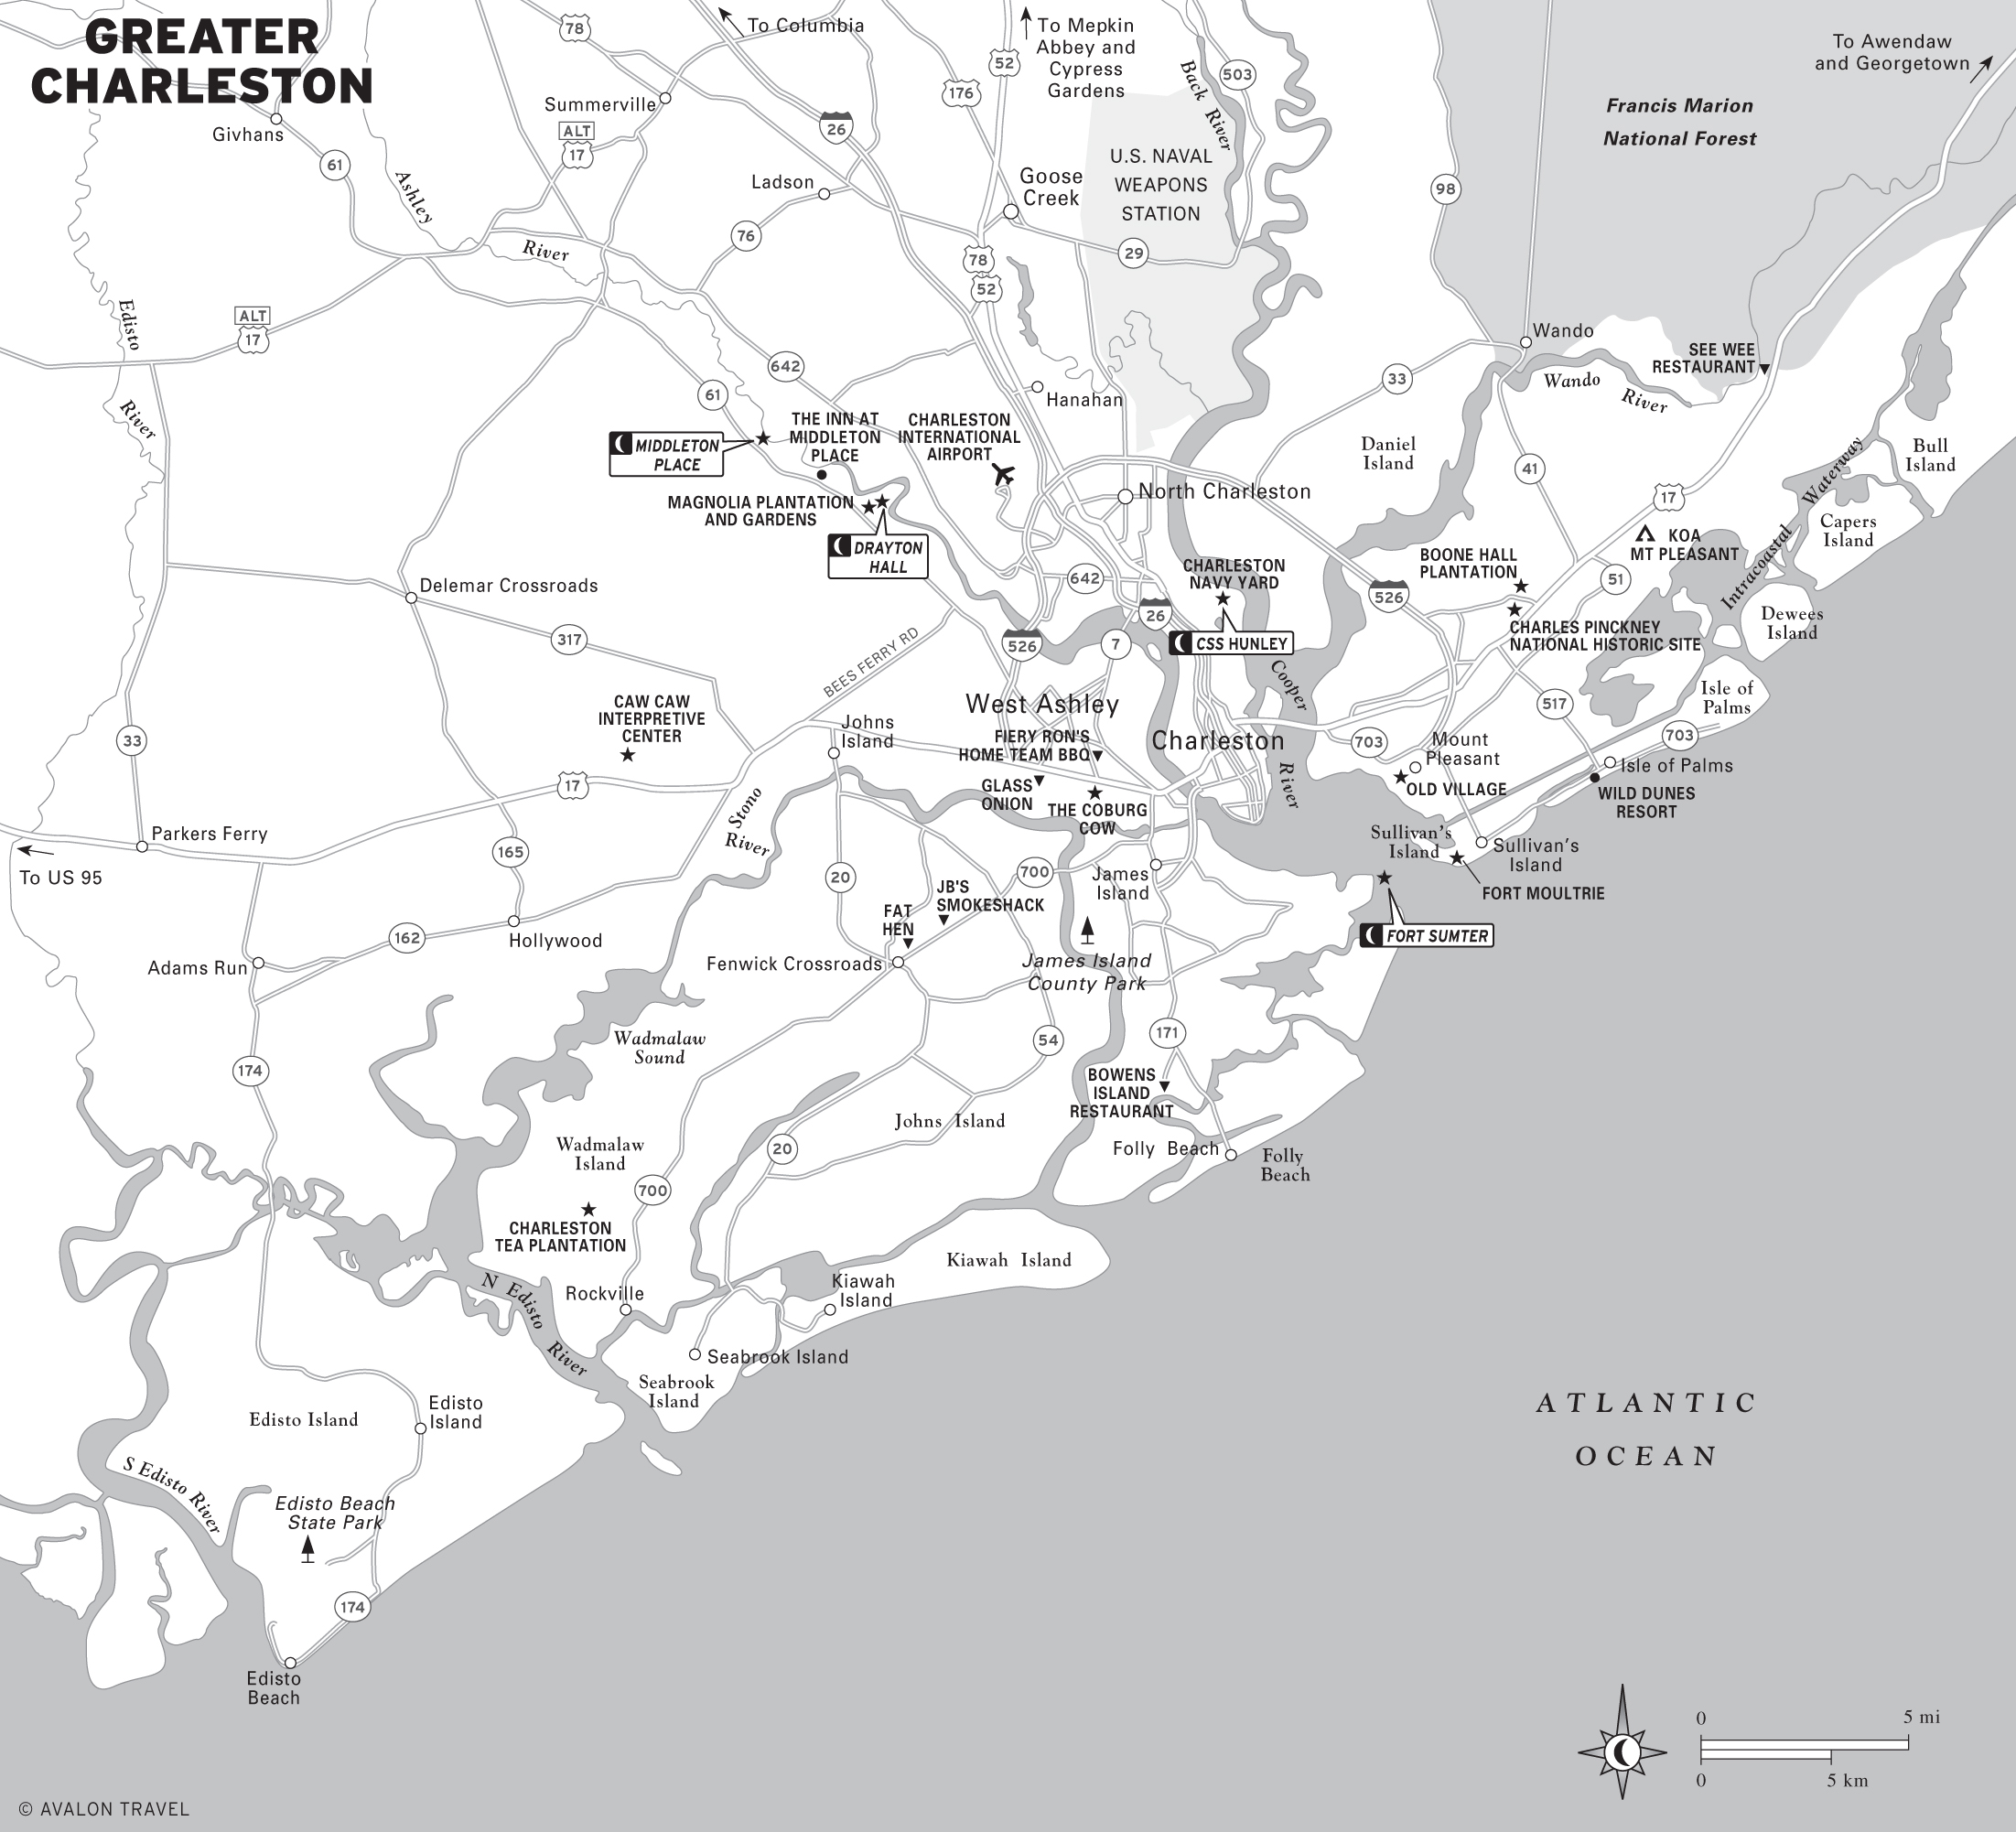 Map of Greater Charleston, SC